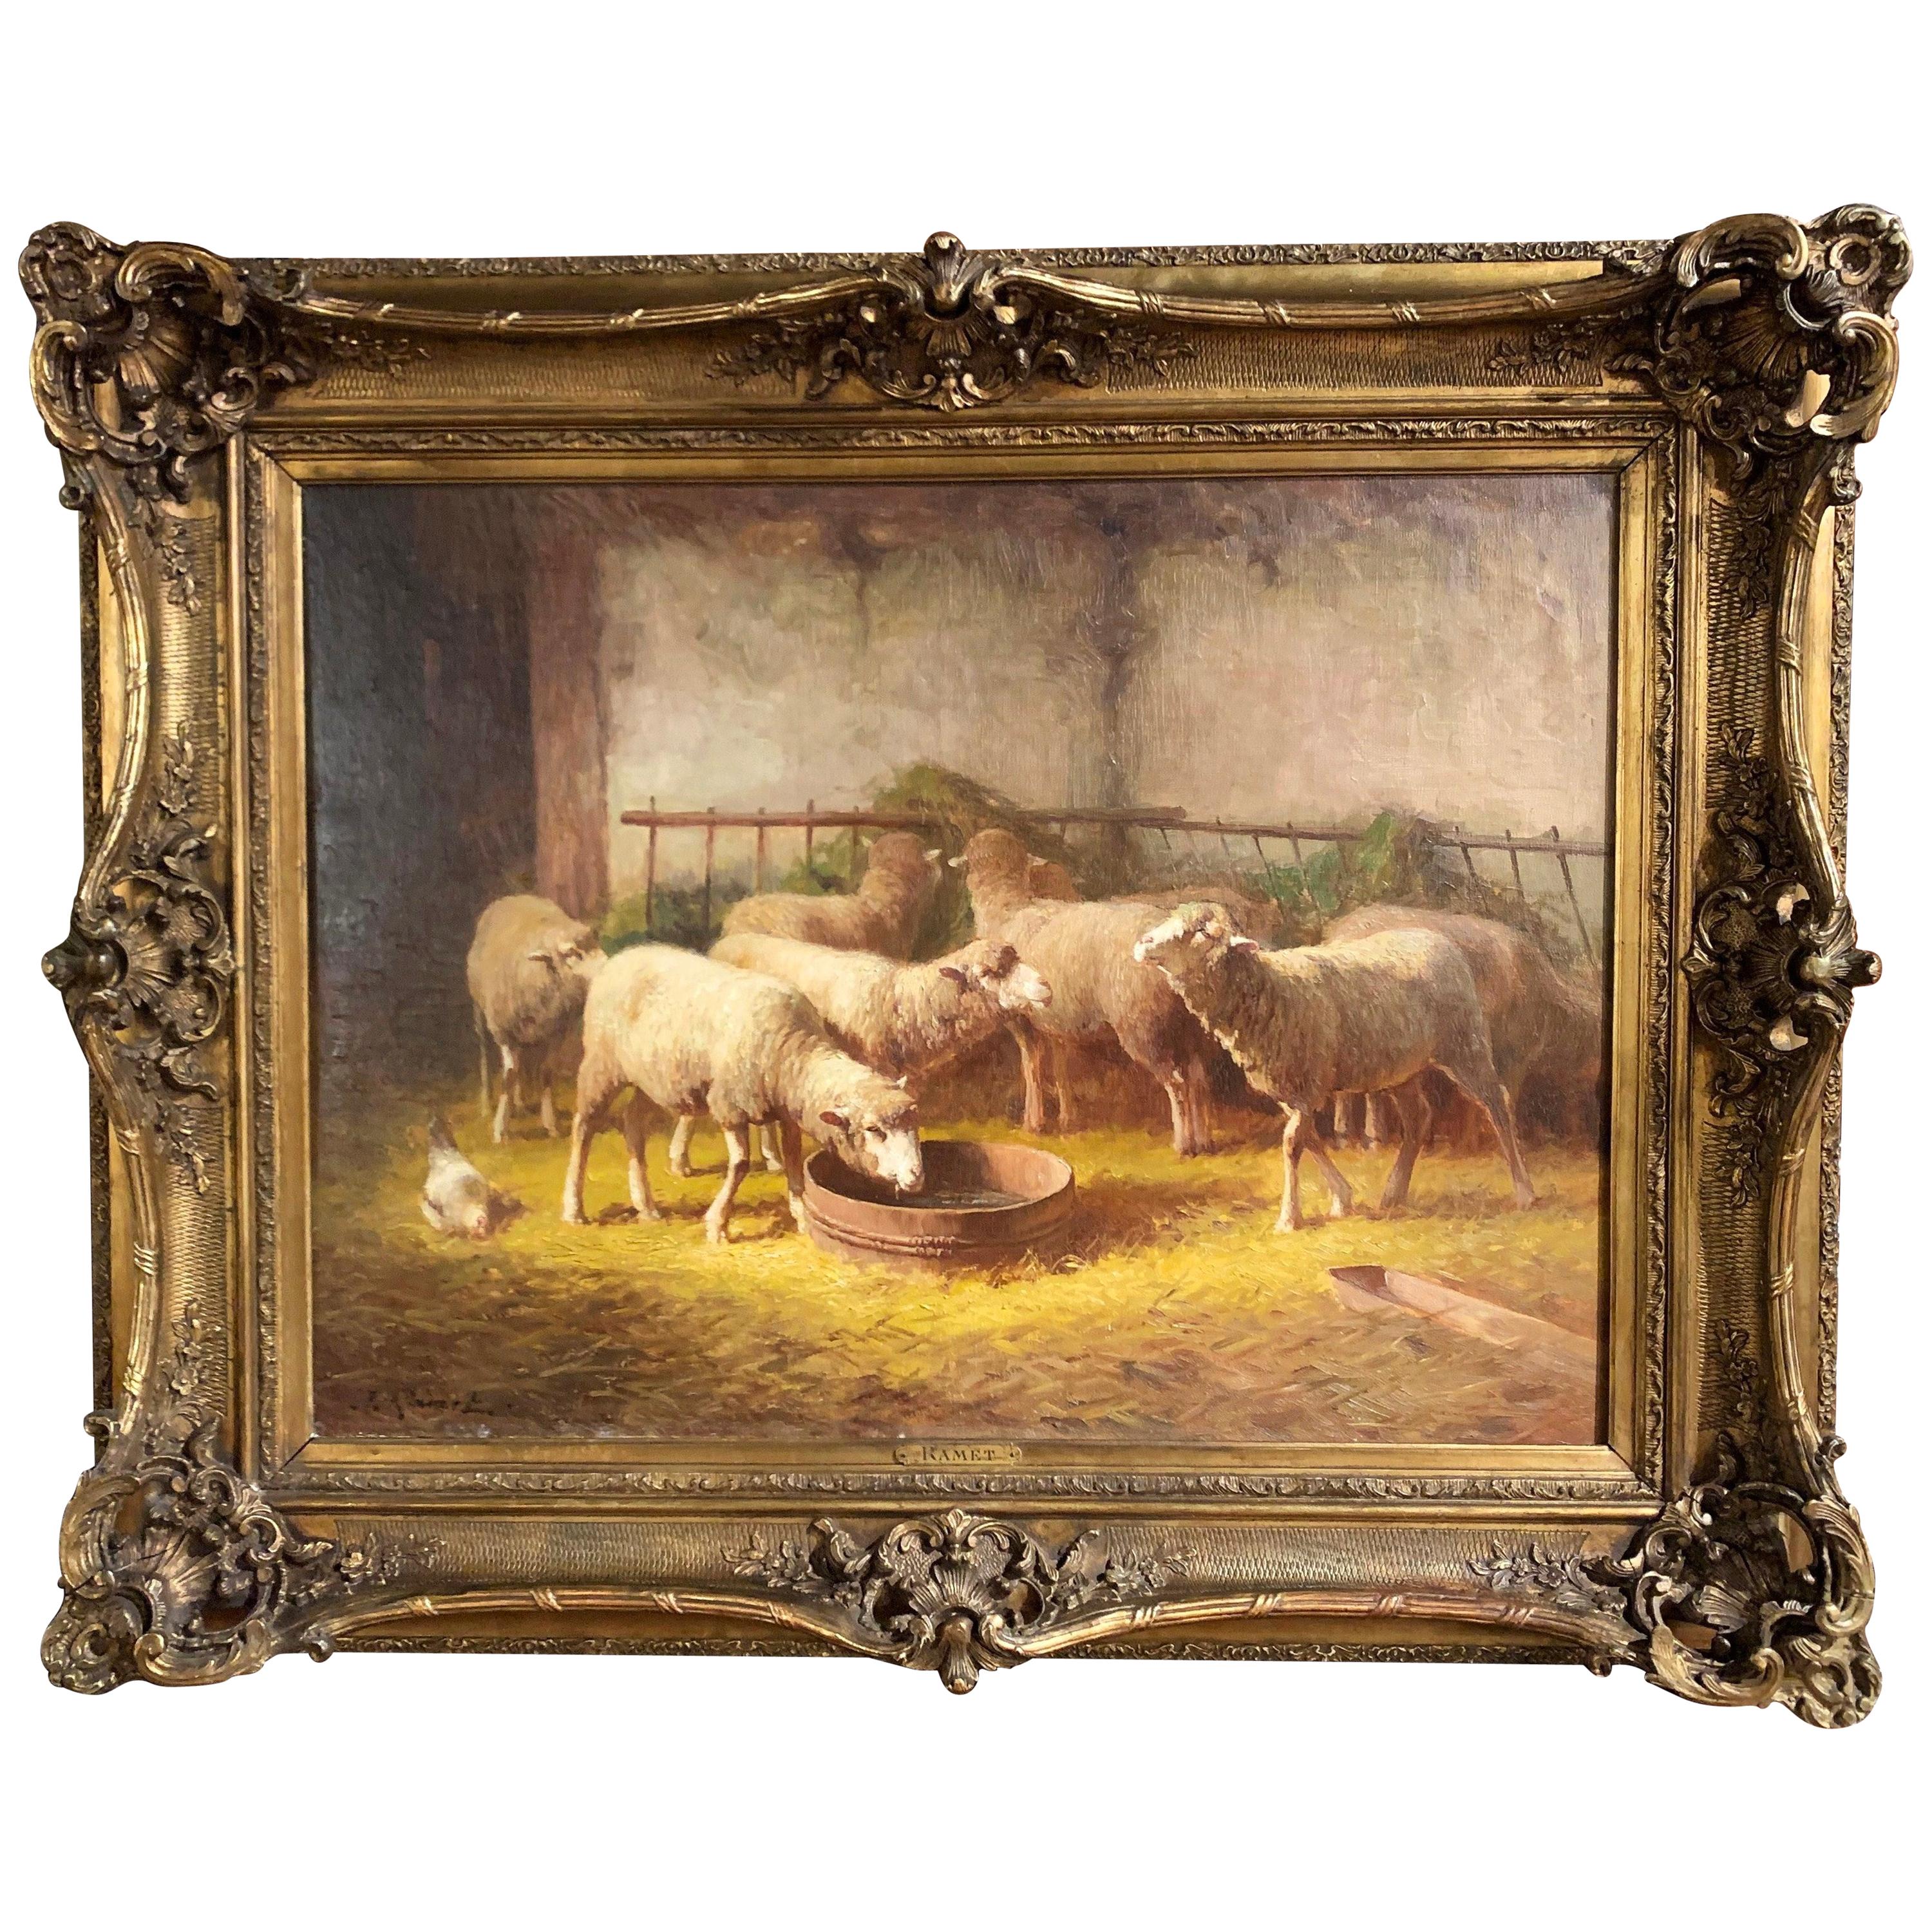 19th Century French Oil on Canvas Sheep Painting in Gilt Frame Signed J. Ramet